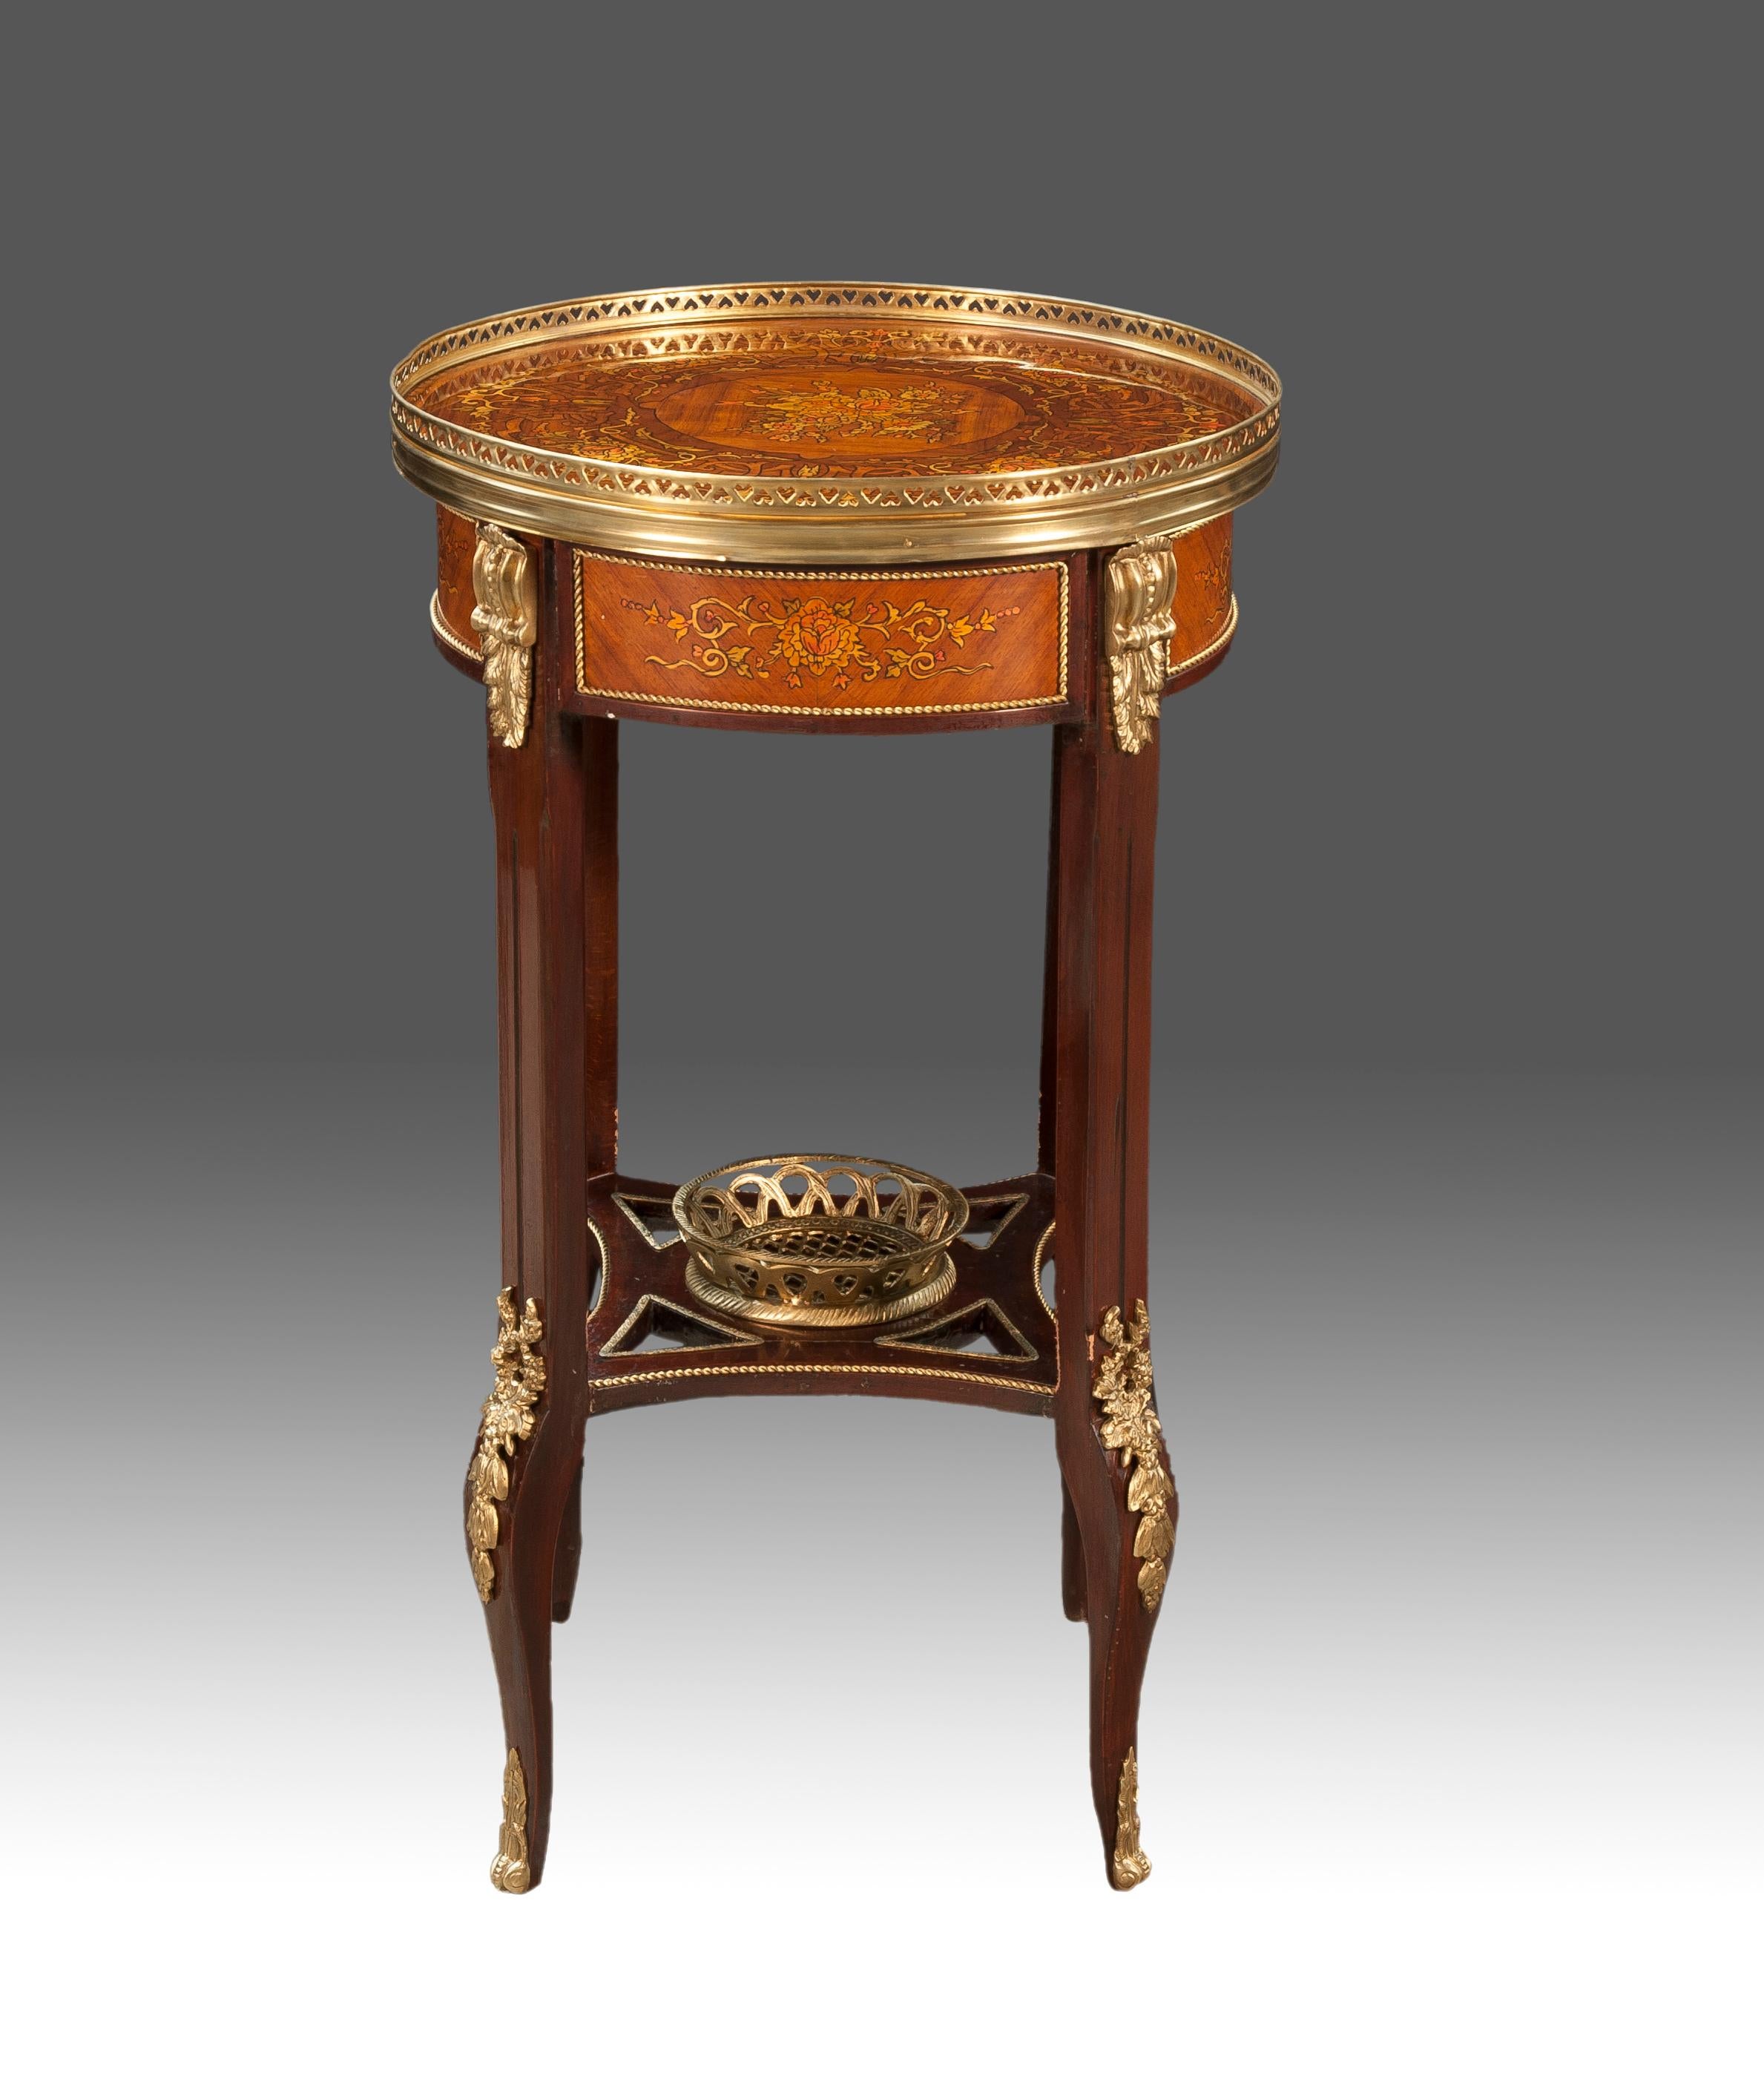 Side table. Wood, marquetry, gilded metal.
Circular side table with four cabriole legs at the bottom and straight from the legs at the bottom and straight from the tabletop that acts as a The tabletop acts as a screen (on which there is an openwork